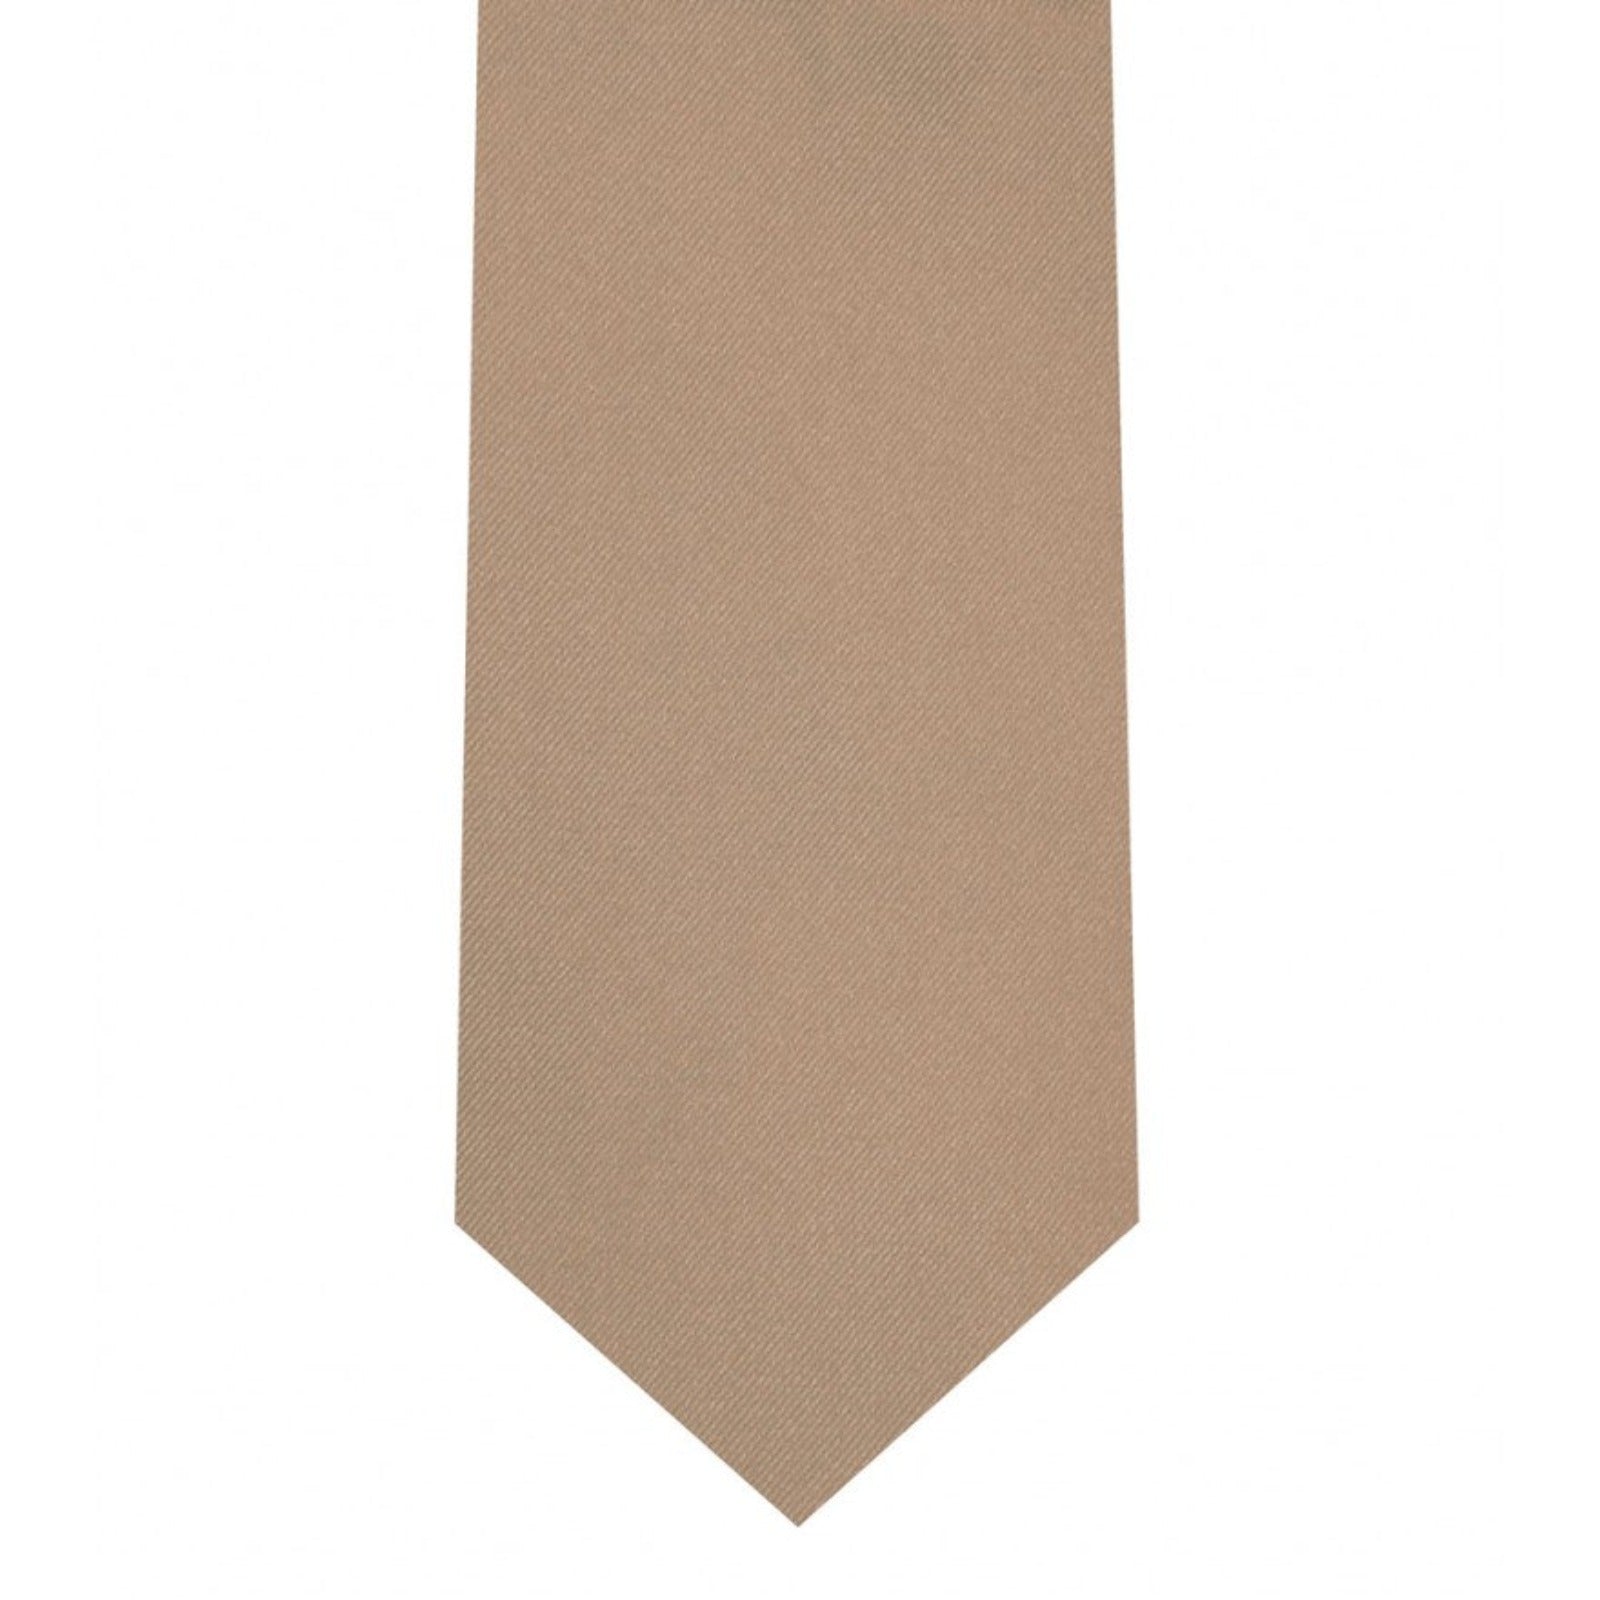 Classic Rose Gold Tie Skinny width 2.75 inches With Matching Pocket Square | KCT Menswear